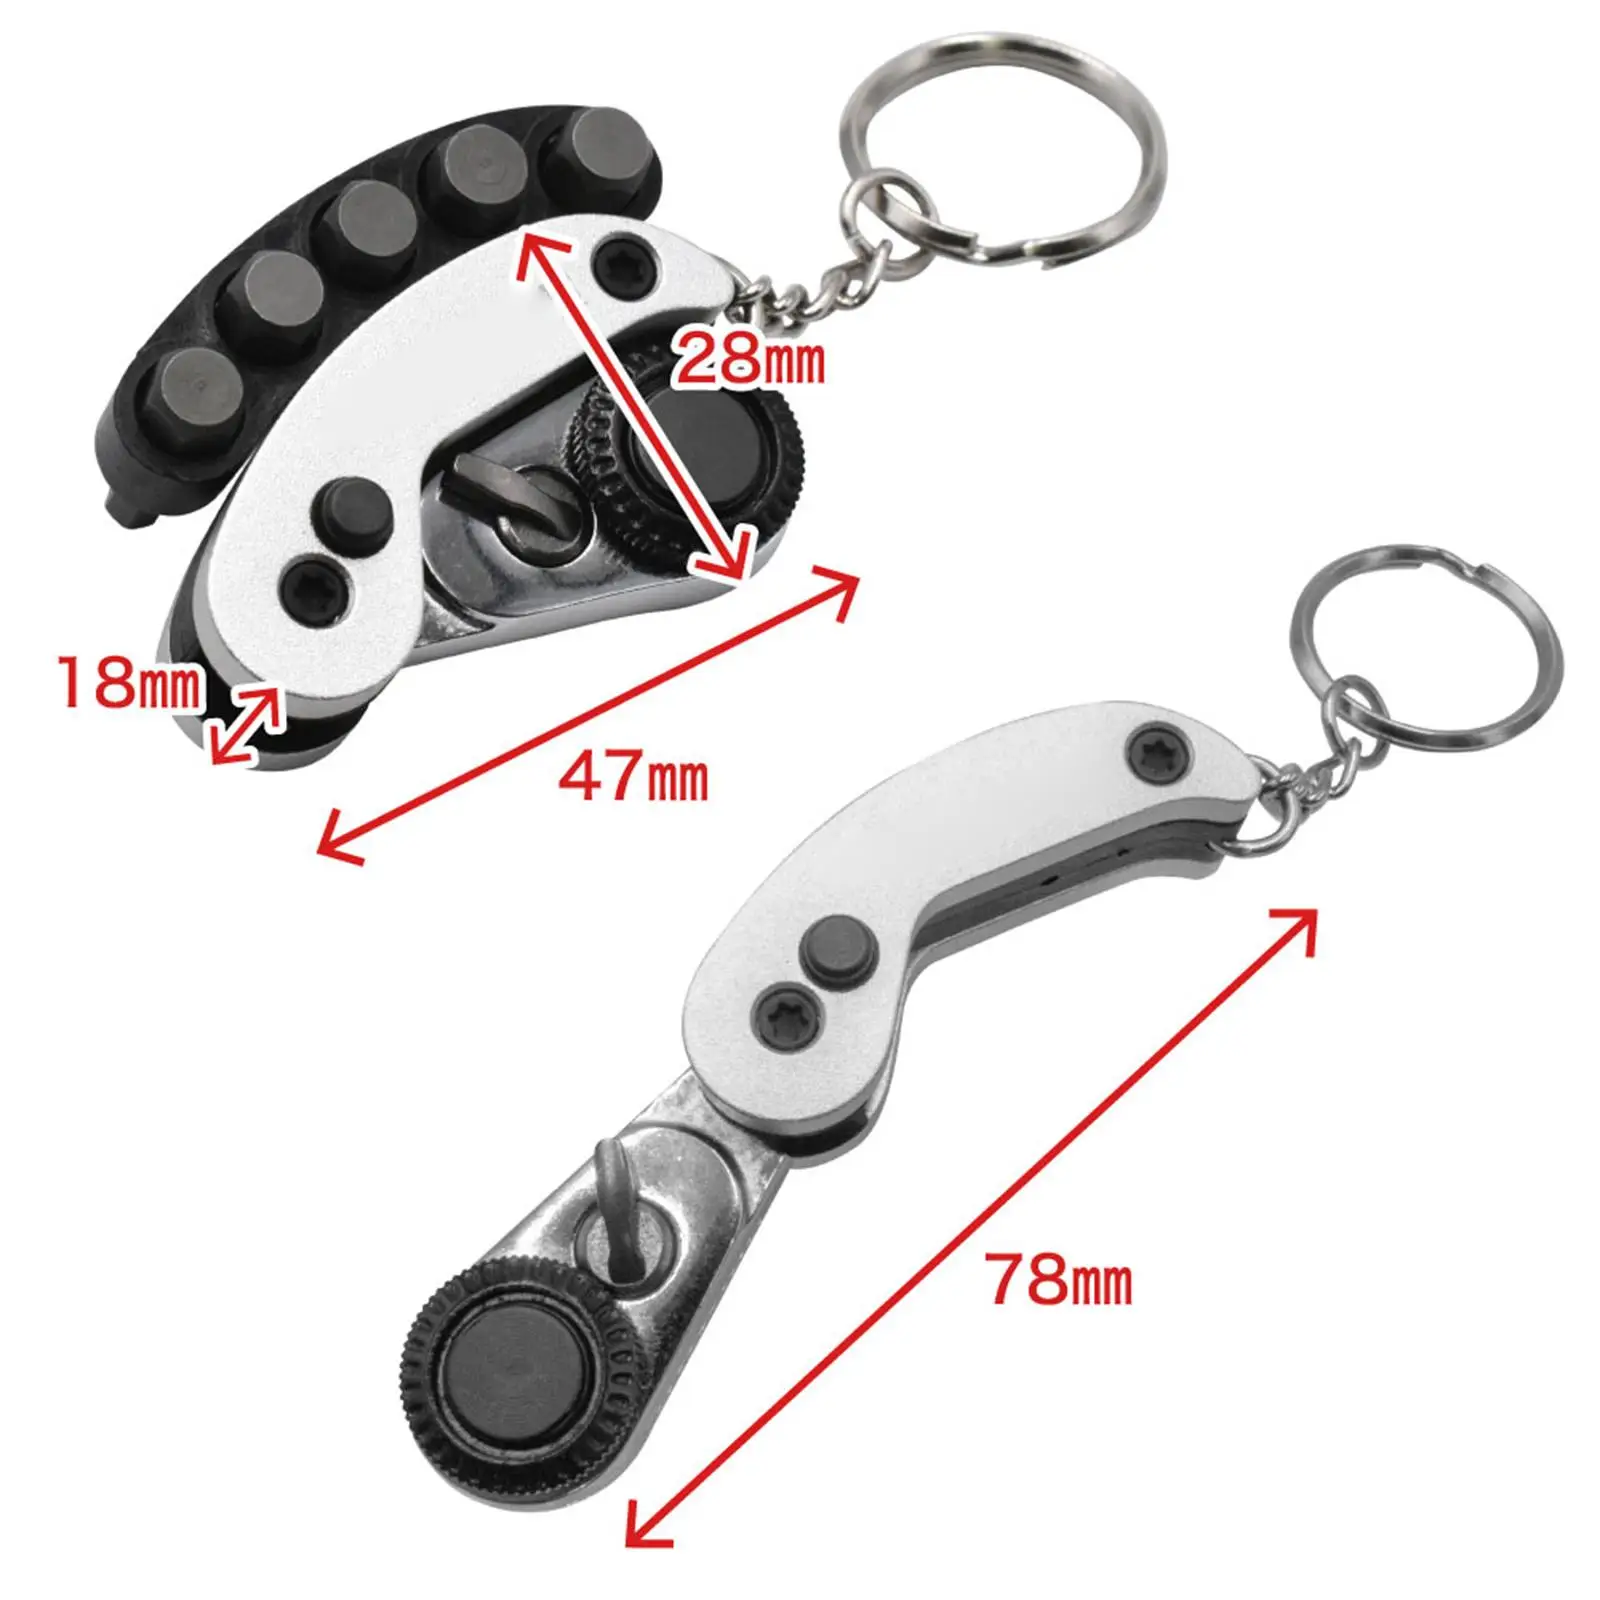 Micro Ratchet Wrench Set Steel Portable Combination Tool for Home Improvement Furniture Assembling Tight Space Appliance Repair